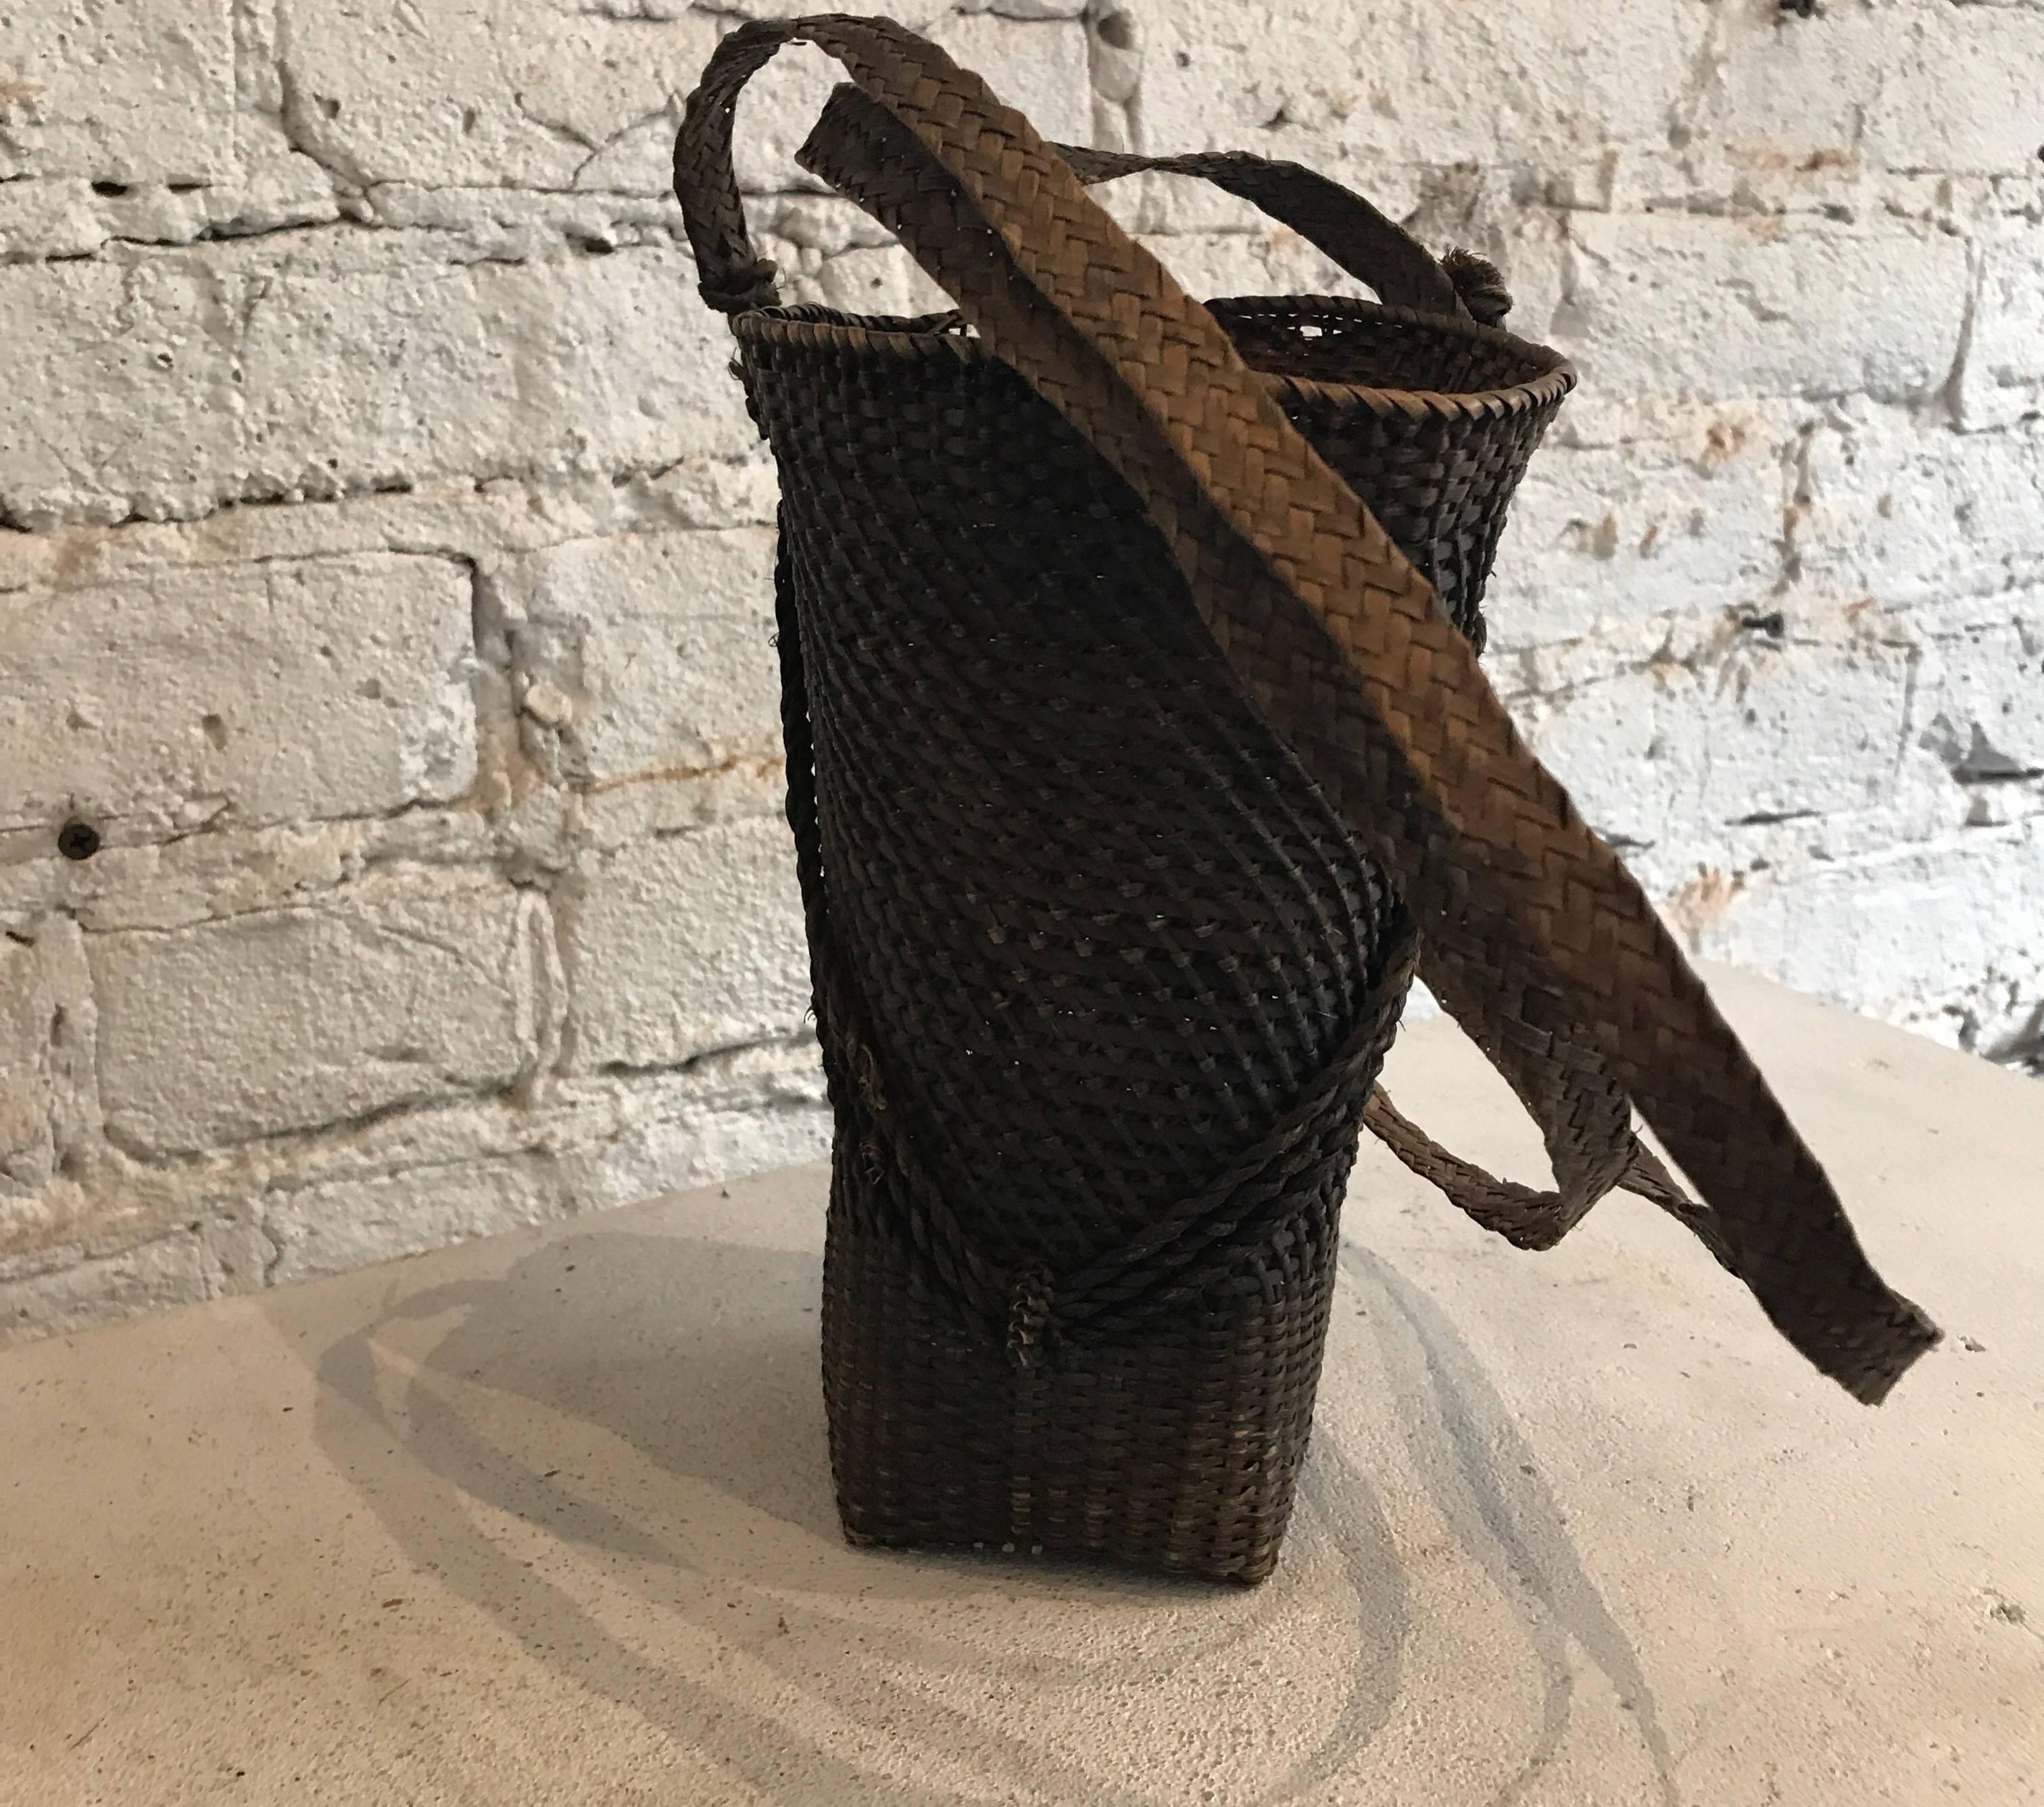 Late 19th century Japanese woven basket with woven strap.
Beautiful small hand-woven basket found in Kyoto Japan.



Dimensions: 7.25 in. H x 5 in. W x 4 in. D; hanging on wall by strap is 29 in. L.